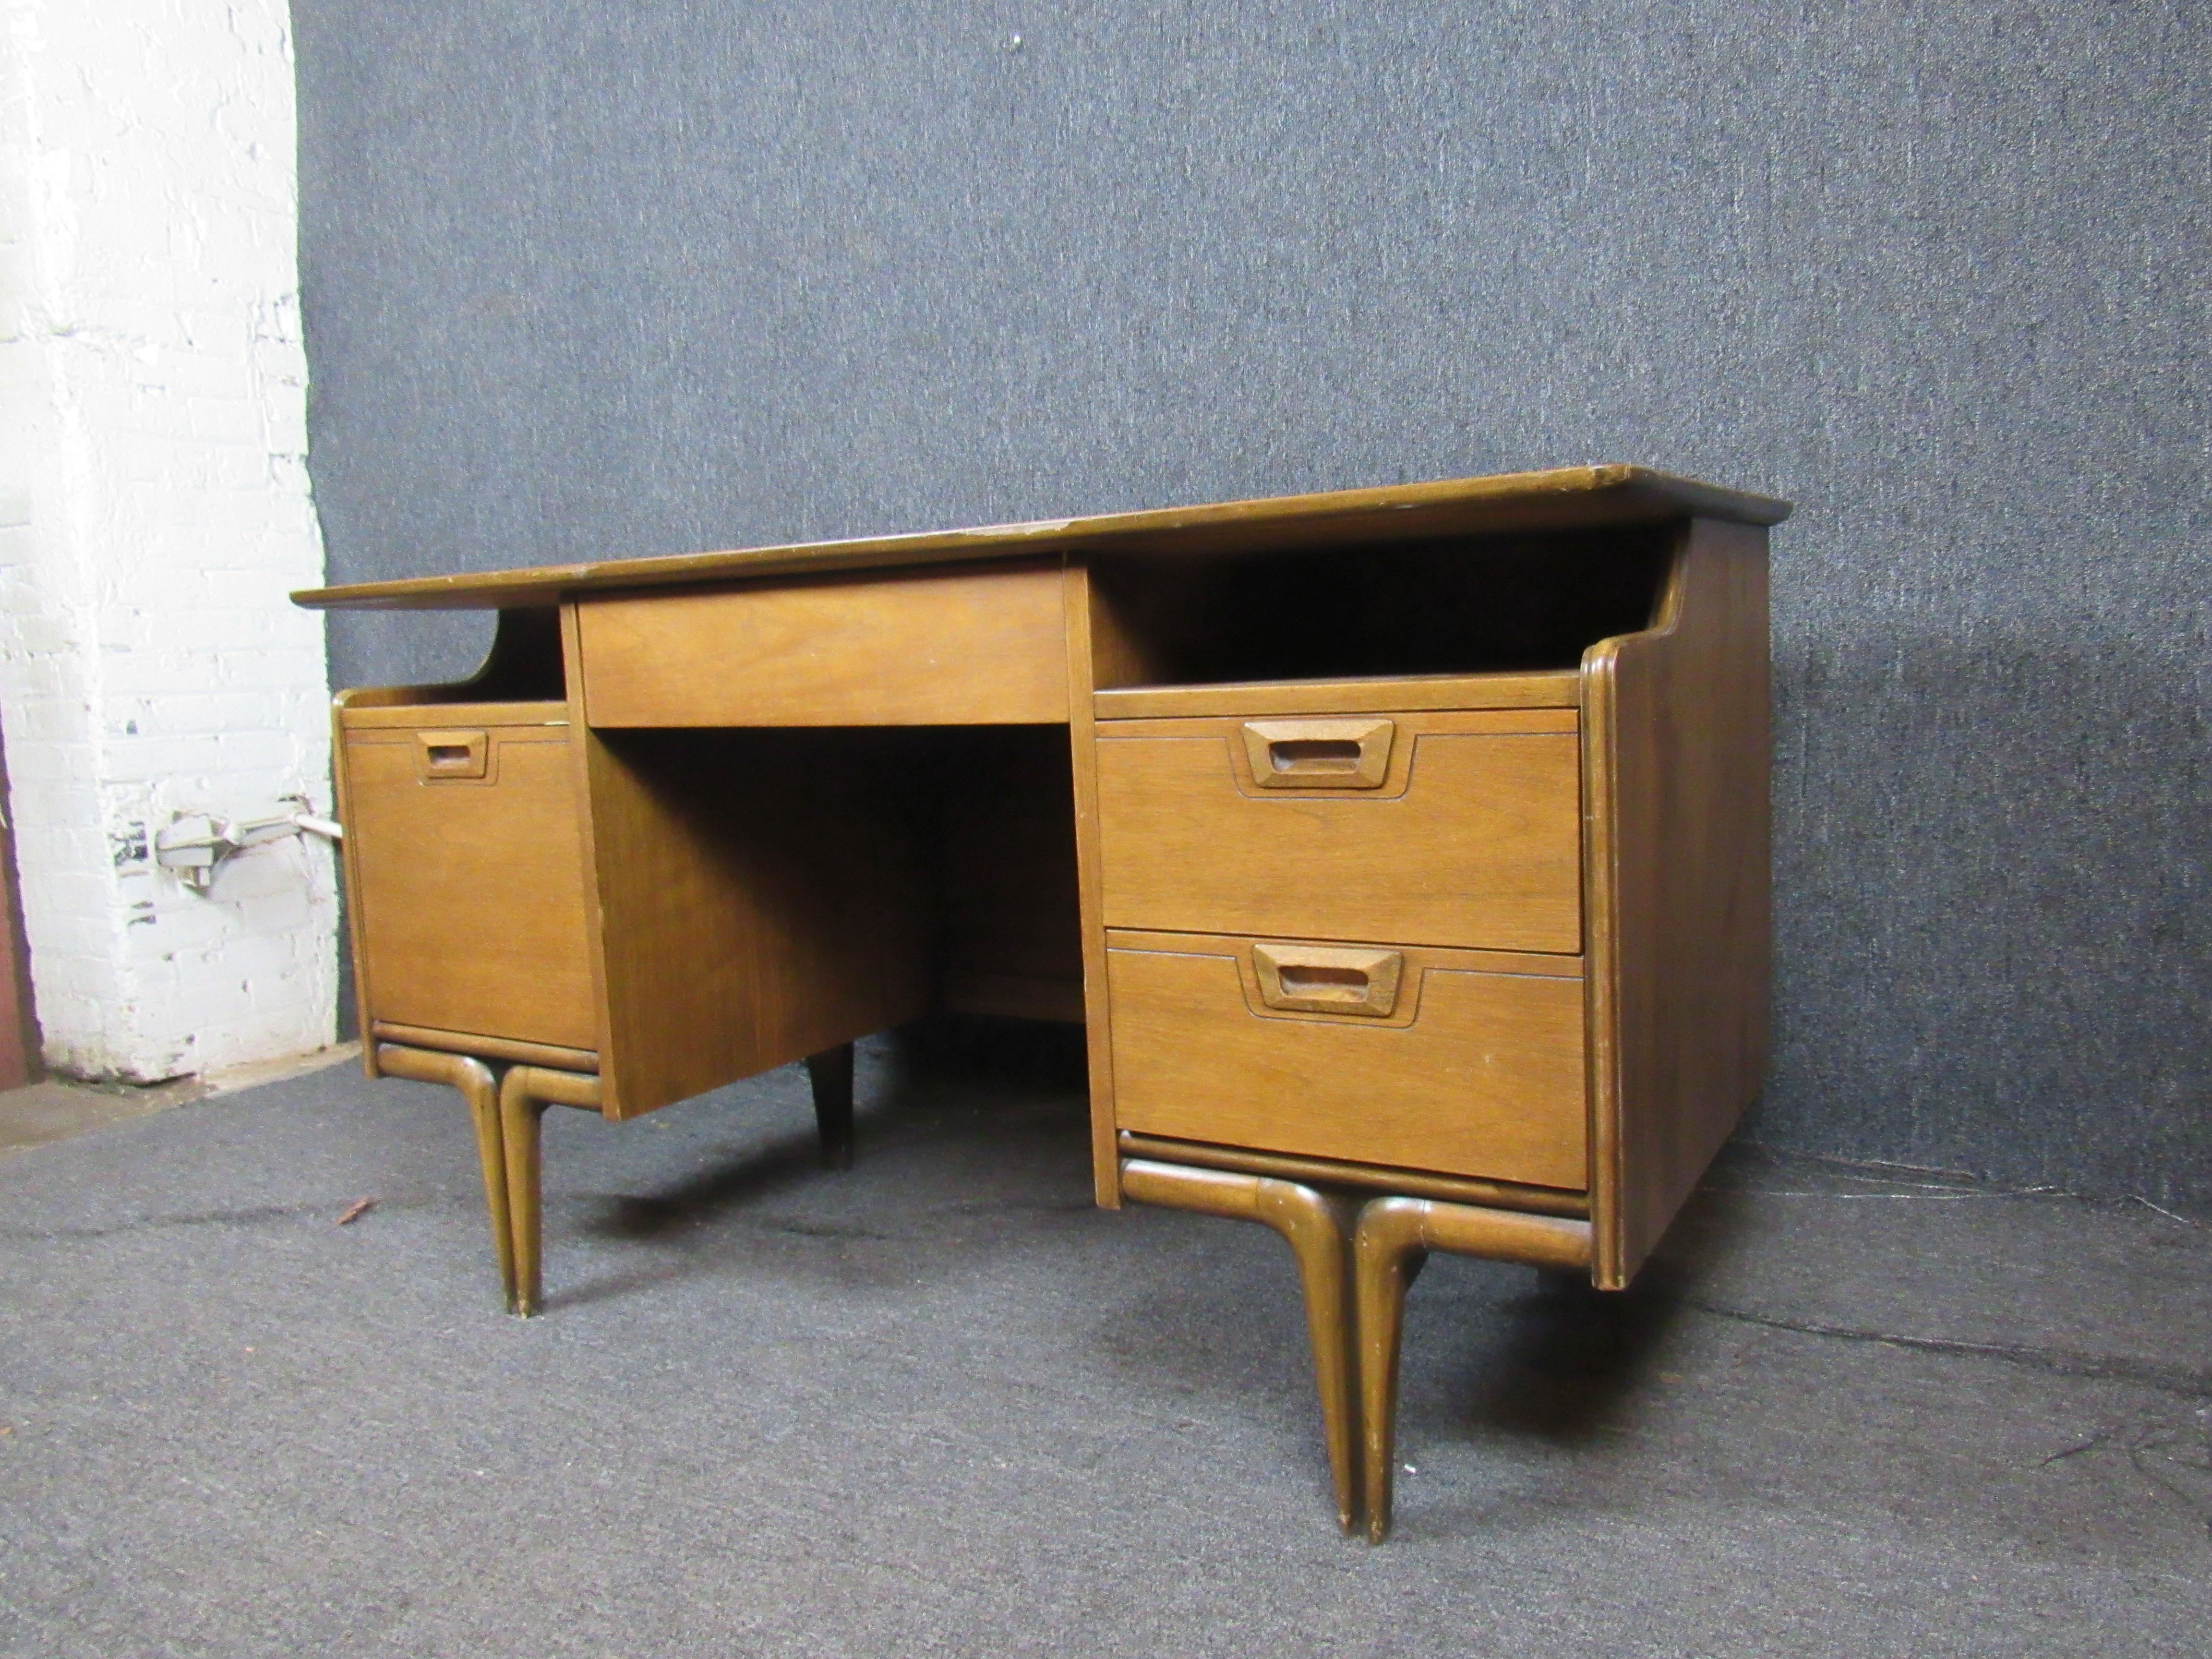 Absolutely stunning vintage desk with unique accents that set it apart from the crowd! A semi-floating top combines with beautiful sculpted legs and a finished back are sure to make this desk a statement piece, no matter what room it's in. Four